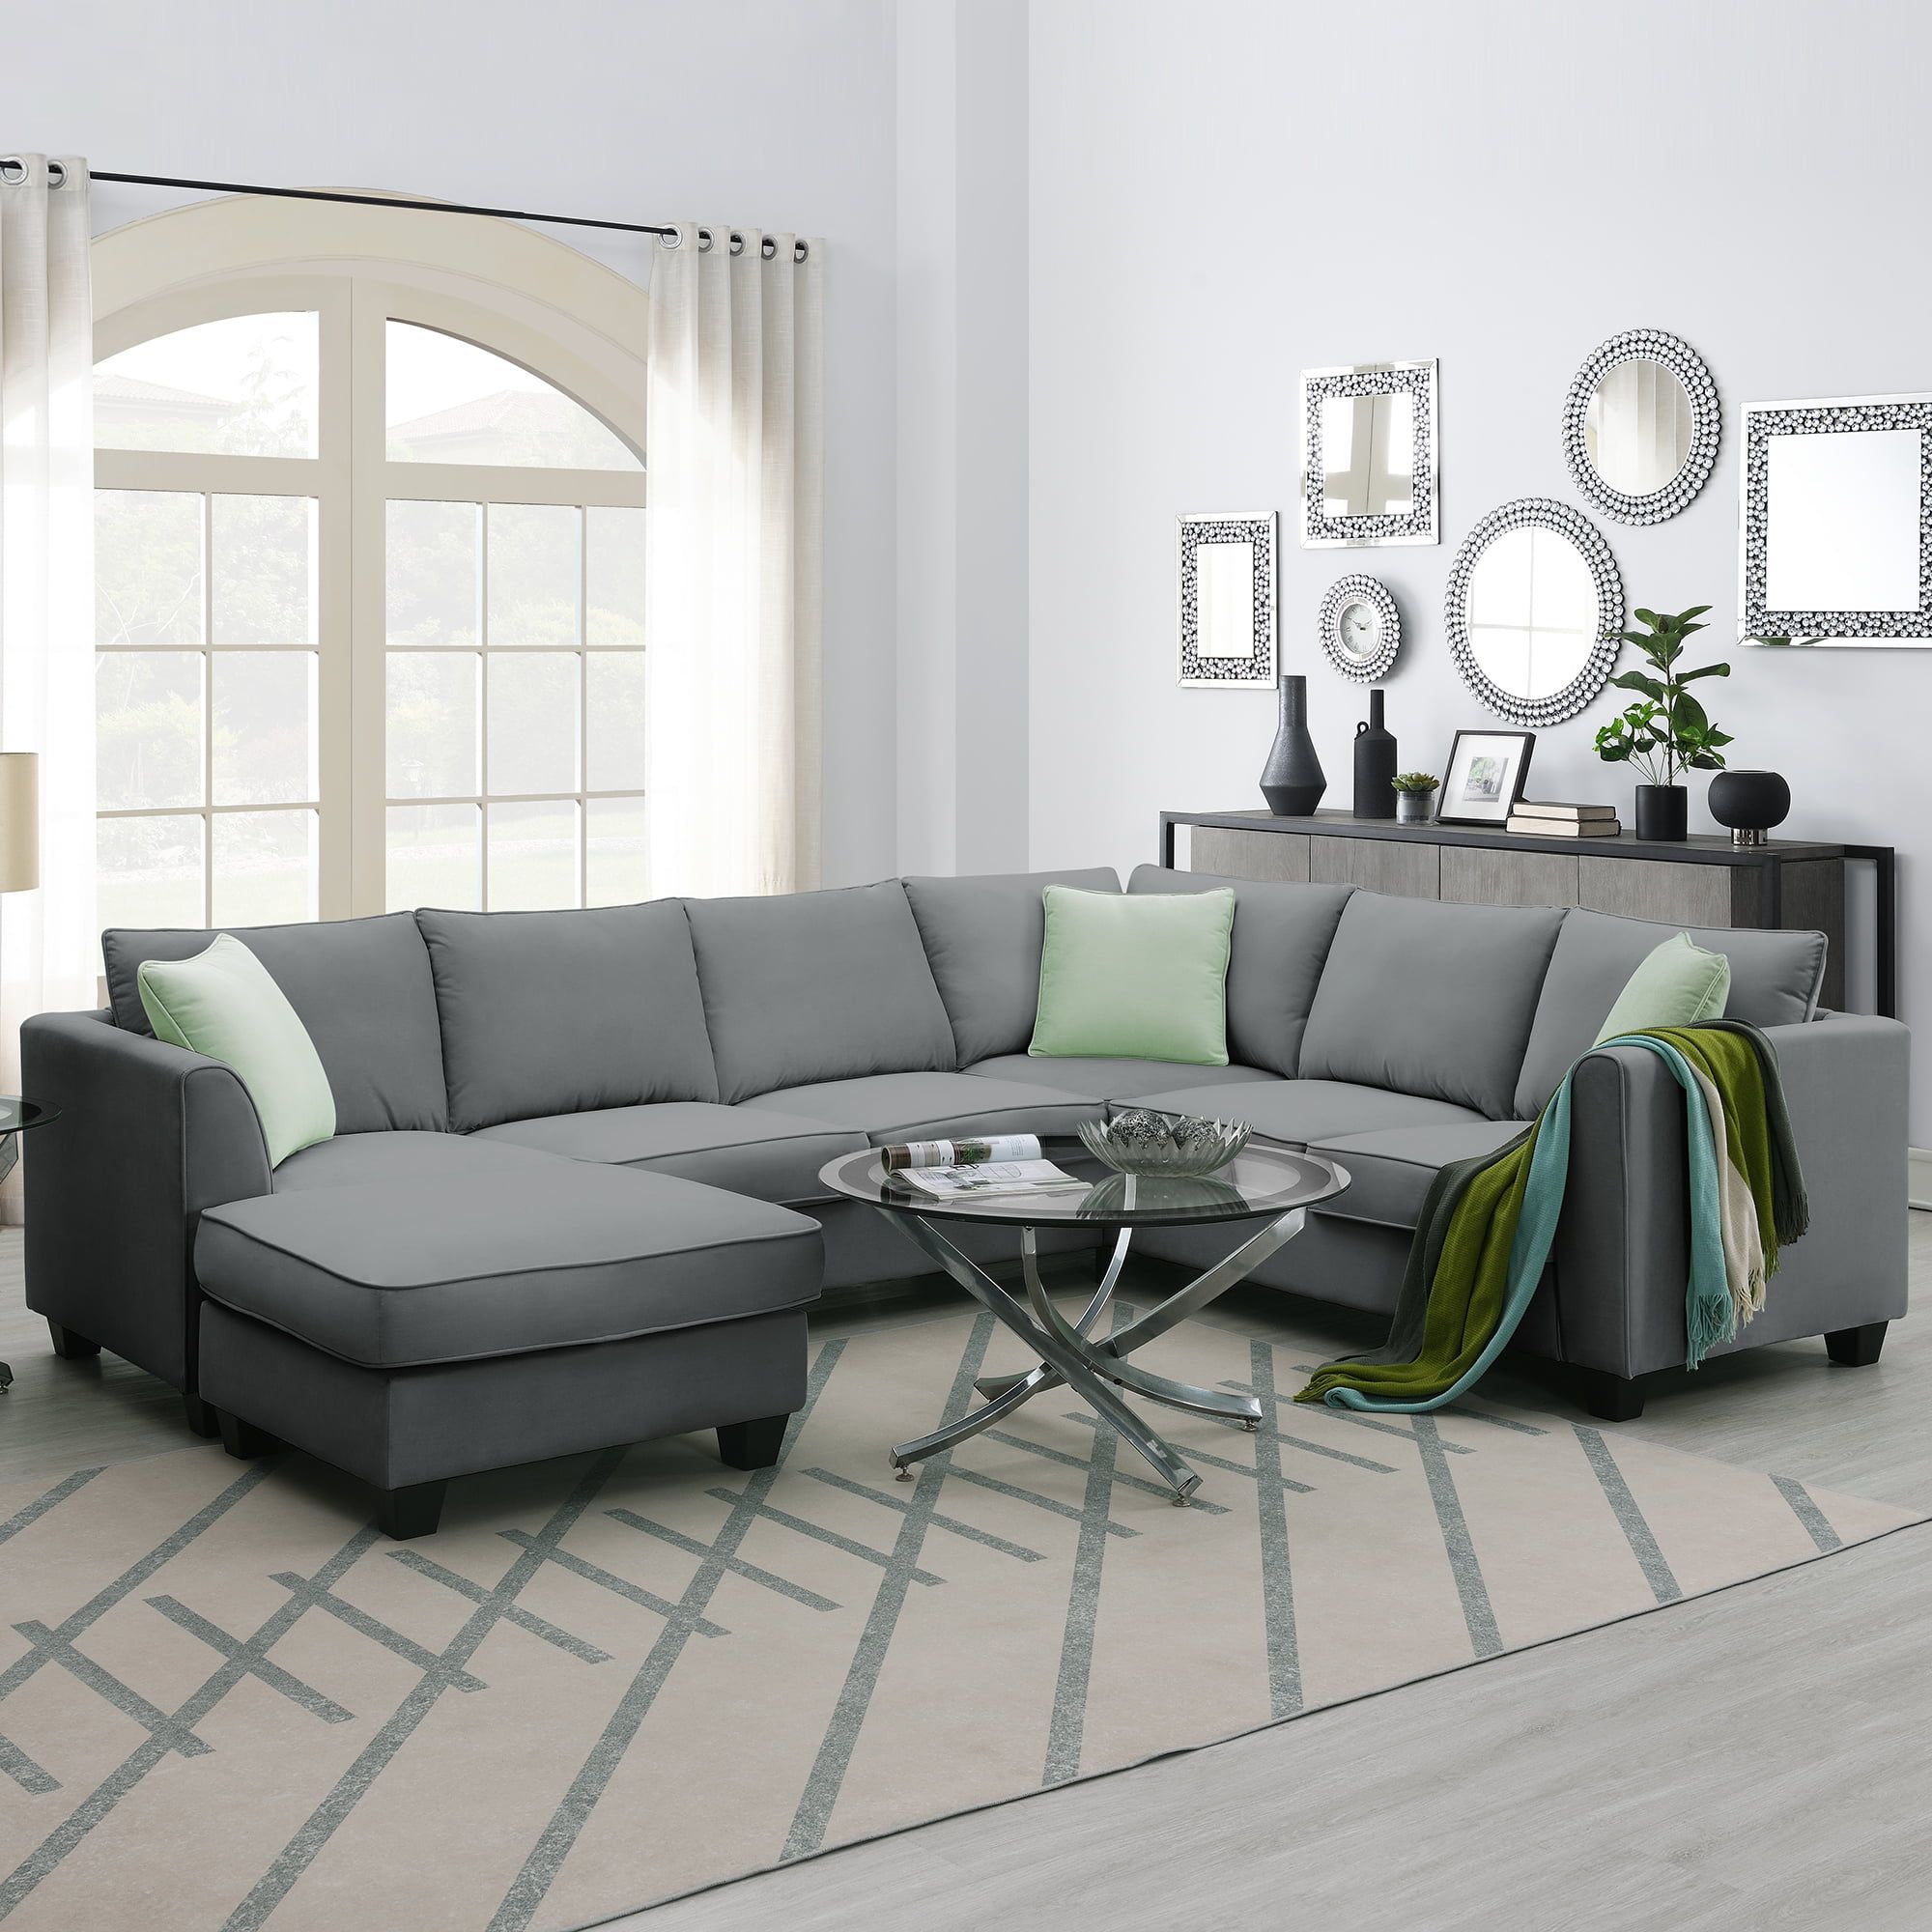 L Shaped Modular Sectional Couch, Kamida 7 Seater Sectional Couch With  Ottoman And 3 Pillows, Modern L Shaped Fabric Upholstered Couch Furniture,  Heavy Duty Sectional Couch For Living Room, Gray – Walmart Throughout 7 Seater Sectional Couch With Ottoman And 3 Pillows (Photo 2 of 15)